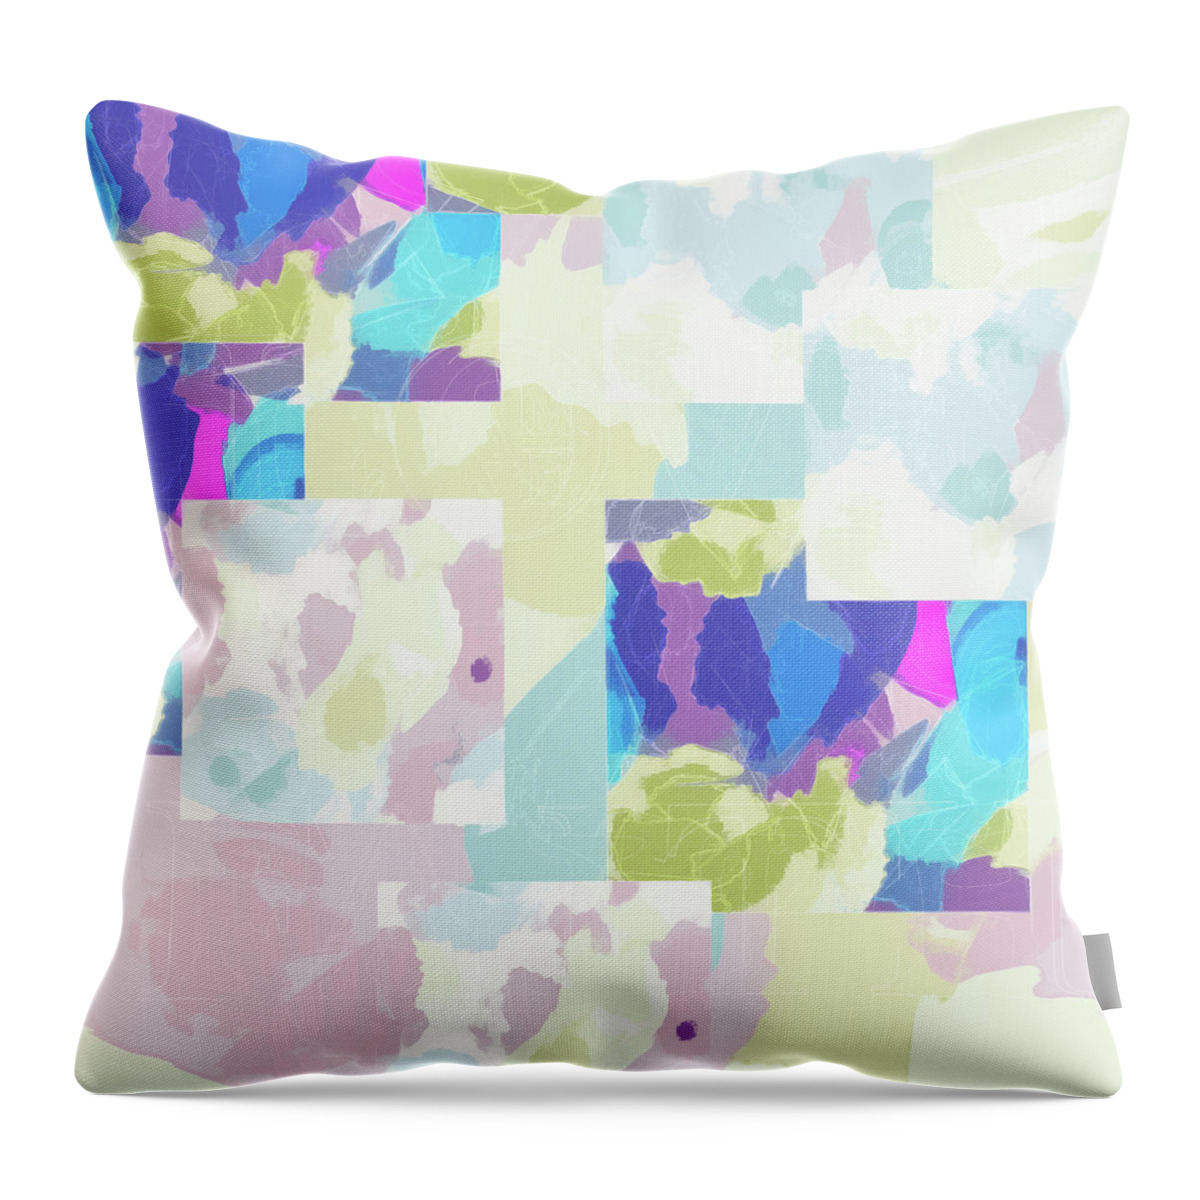 Jesus Throw Pillow featuring the digital art My FAITH My LOVE by Payet Emmanuel